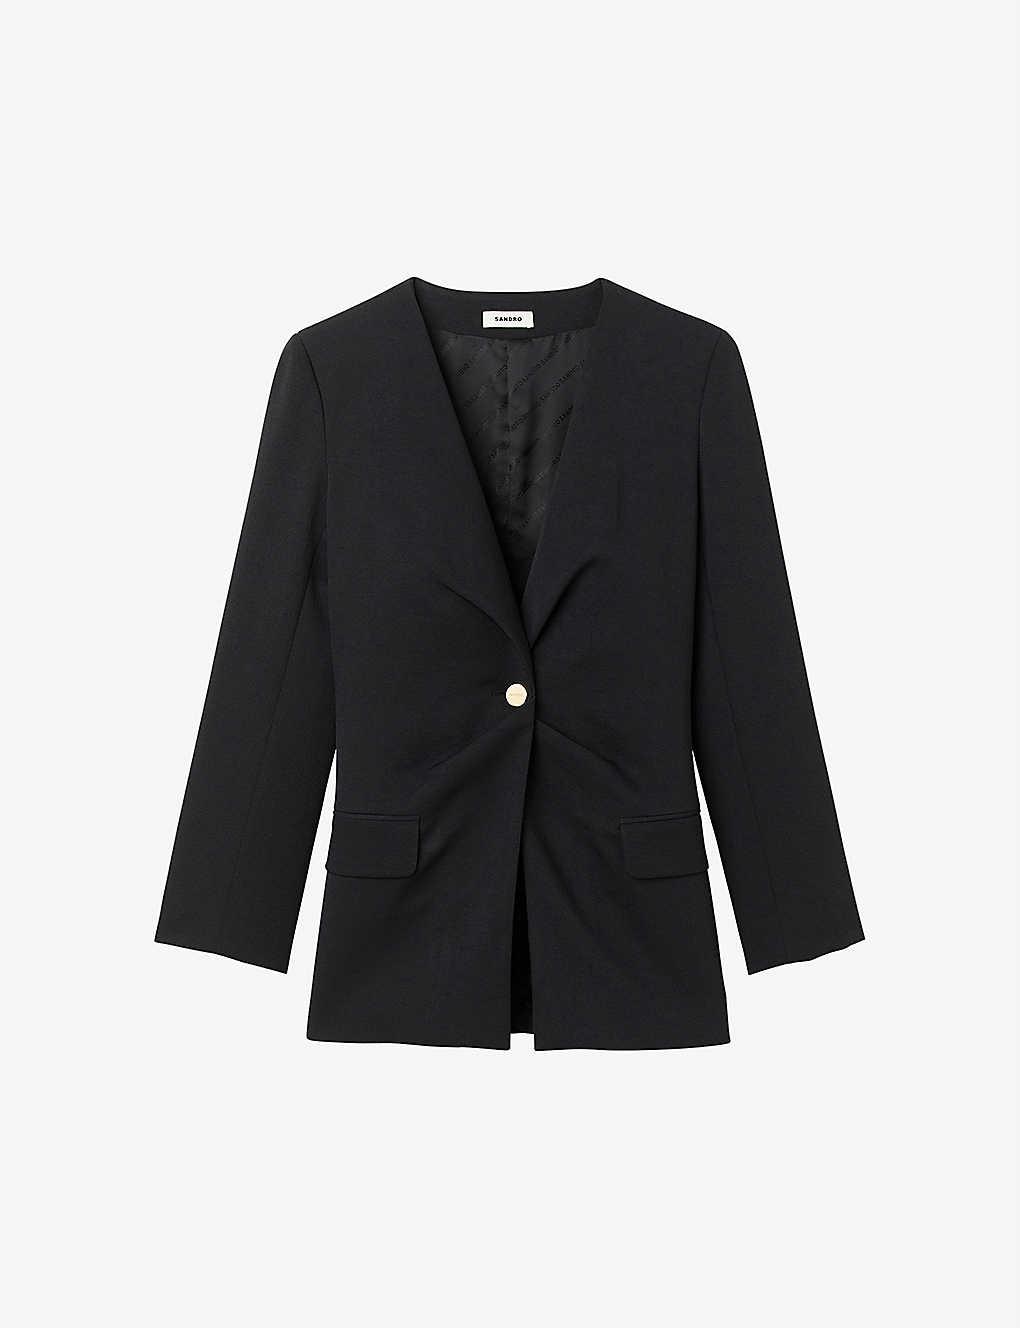 Sandro Abilly Single-breasted Slim-fit Woven Blazer in Black | Lyst